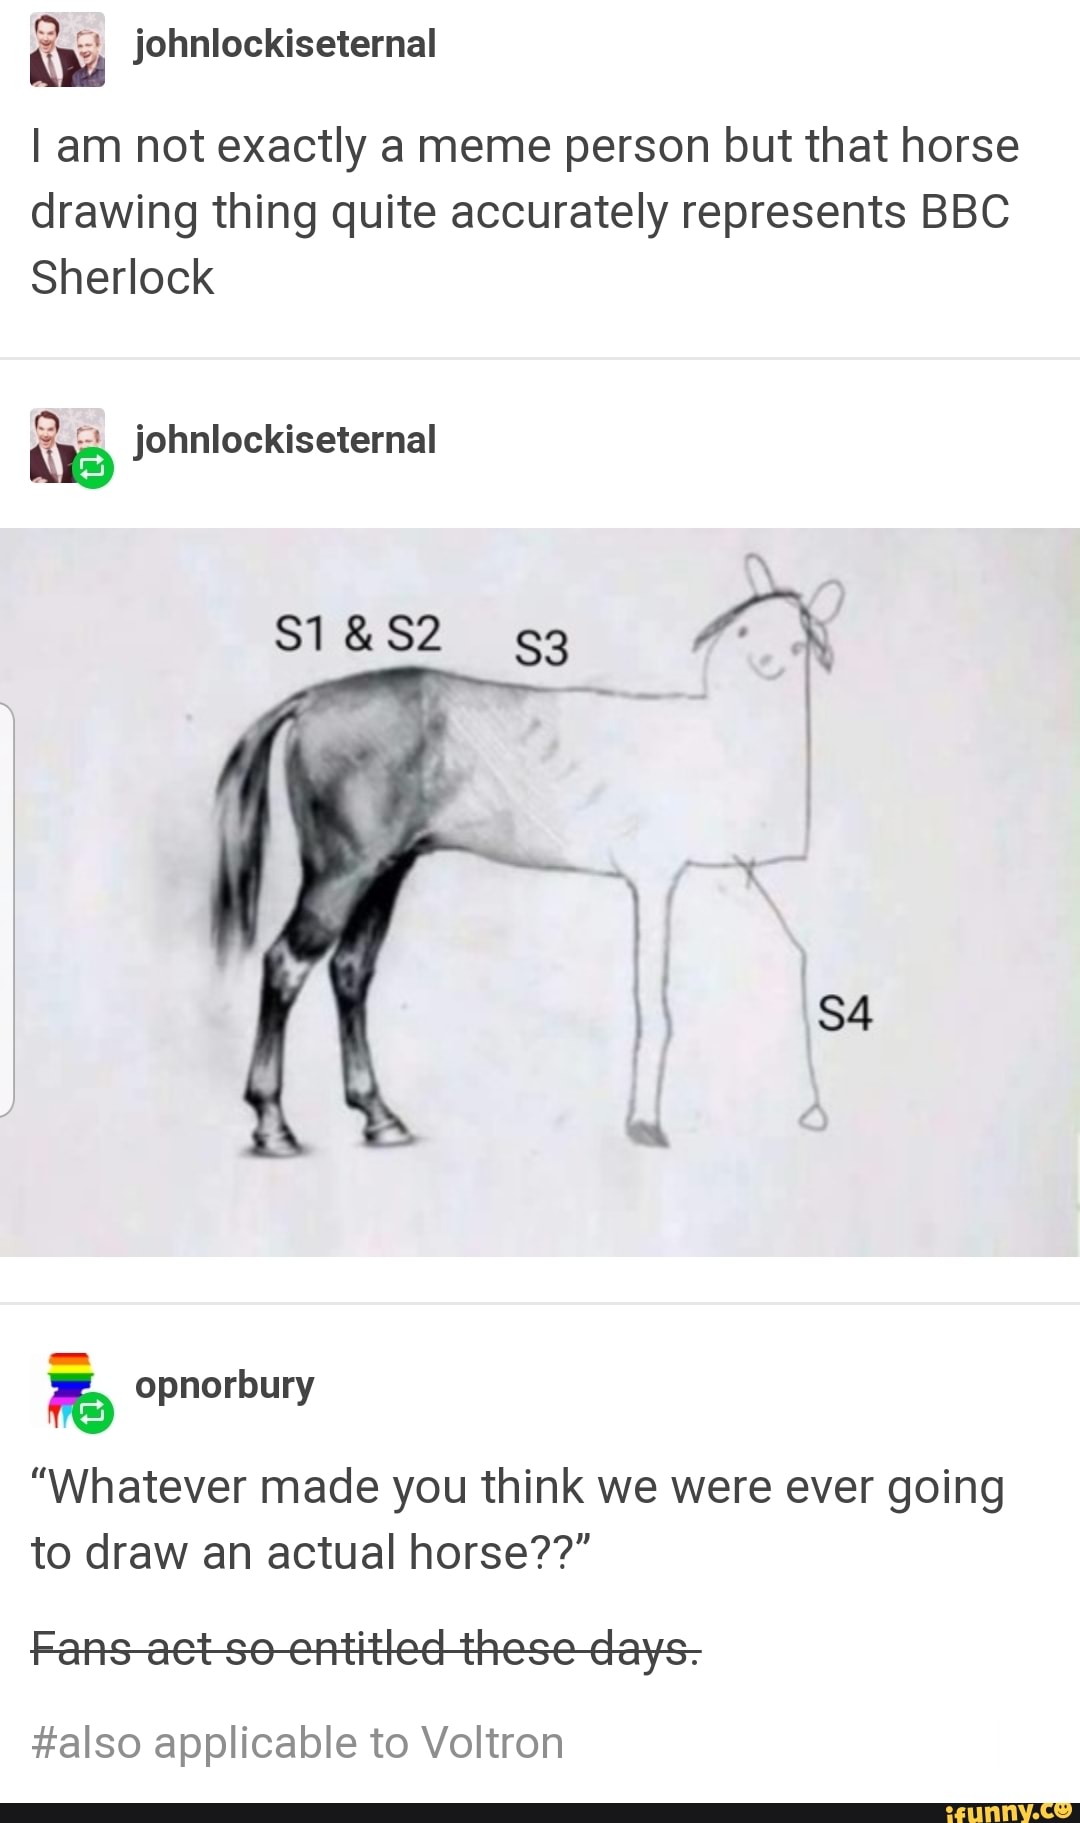 I Am Not Exactly A Meme Person But That Horse Drawing Thing Quite Accurately Represents Bbc Sheï¬ock Whatever Made You Think We Were Ever Going To Draw An Actual Horse Ifunny The image has been used to describe the feeling of being rushed. meme person but that horse drawing